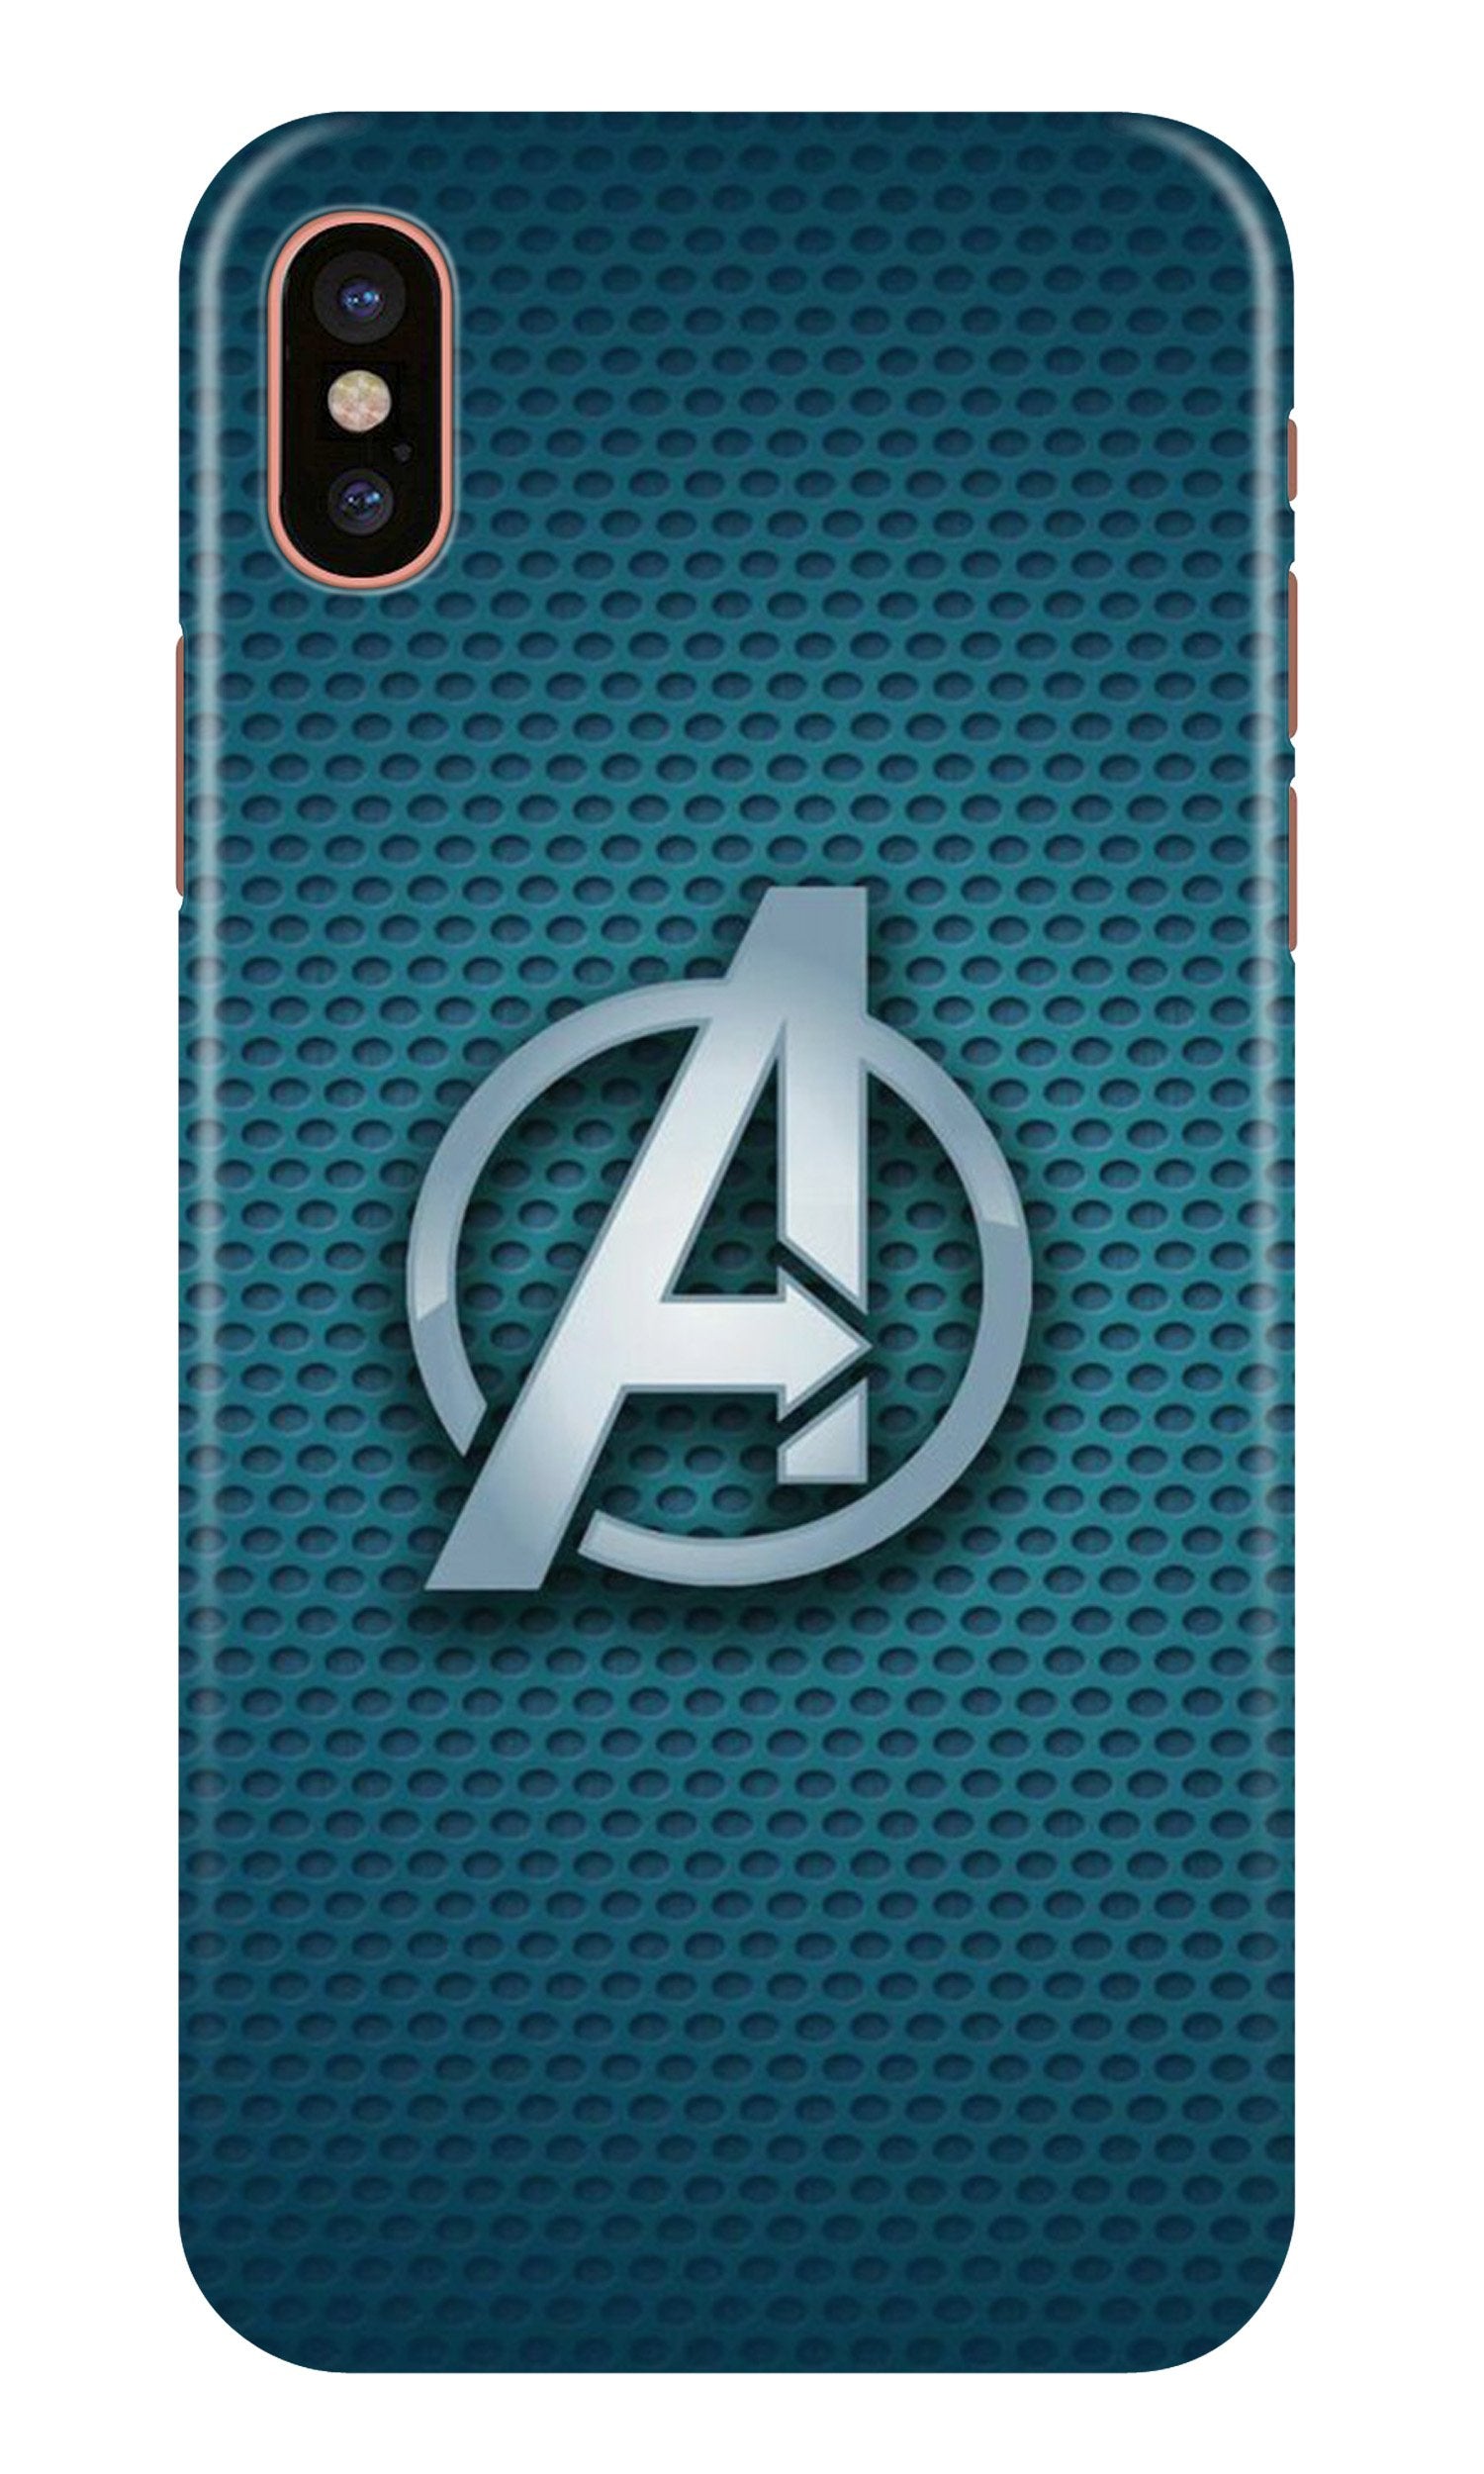 Avengers Case for iPhone X (Design No. 246)